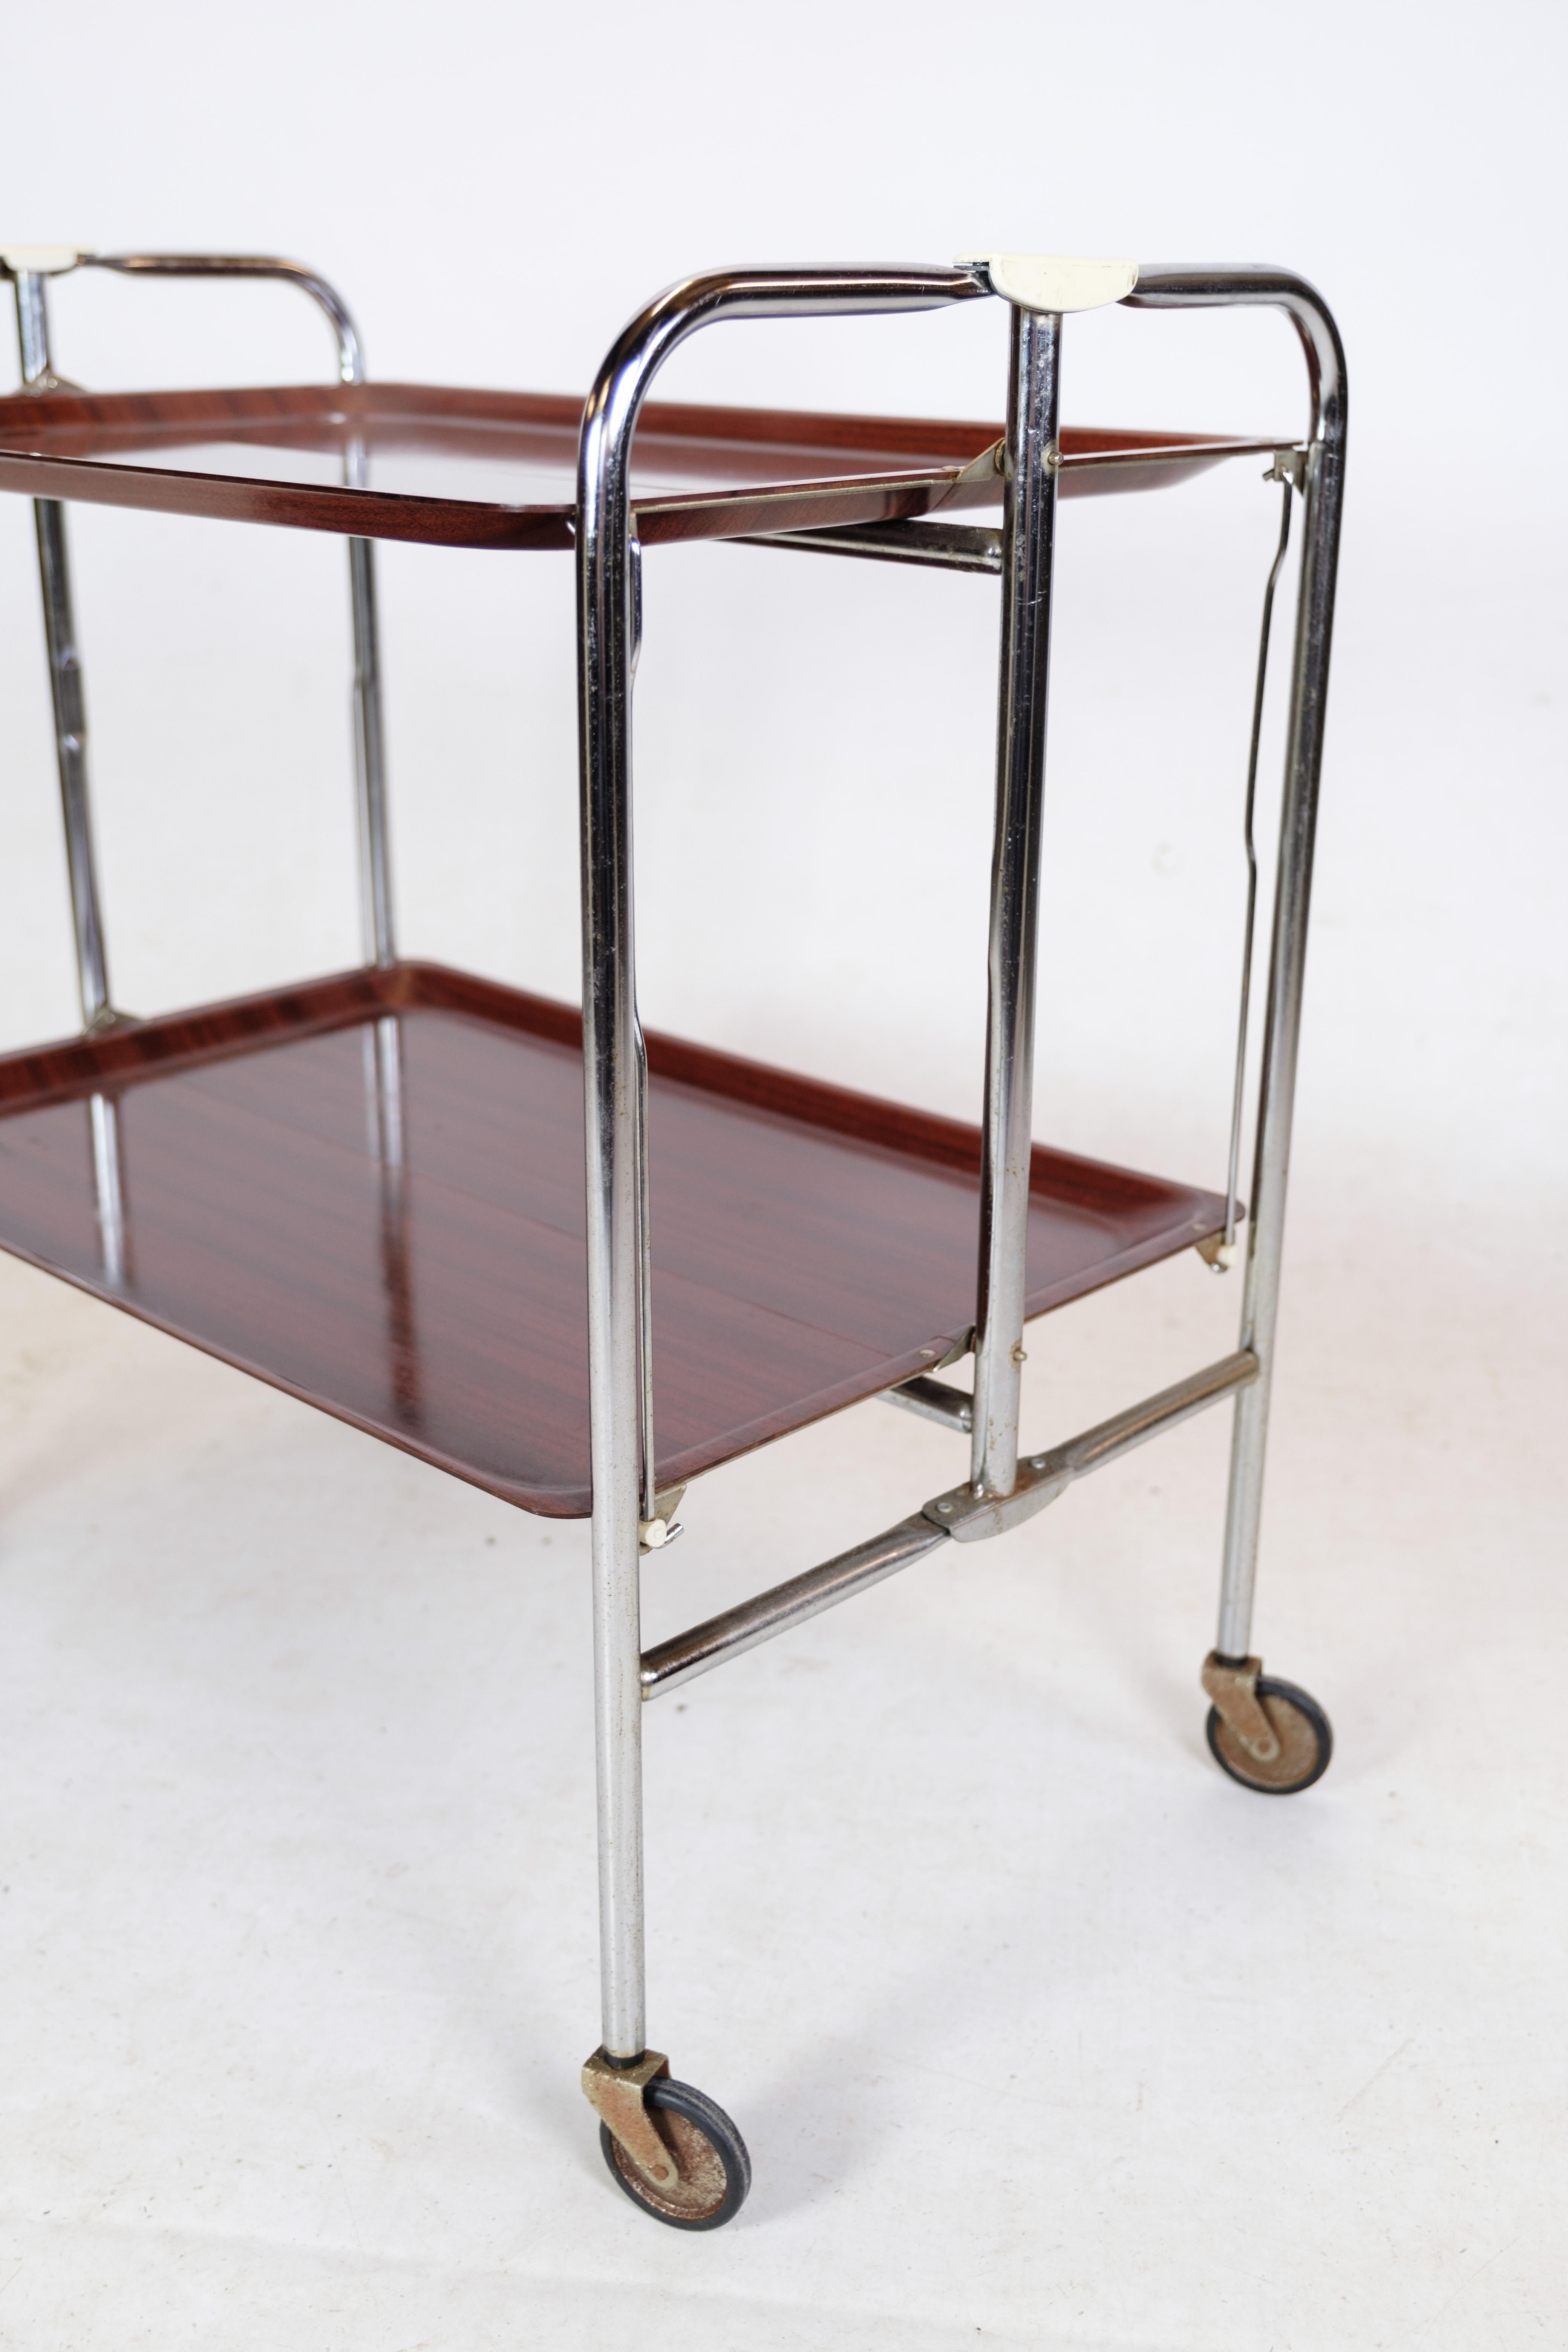 Rolling table with imitation mahogni surface with chromed metal frame and original wheels.
Measurements in cm: H:68 W:66 D:41